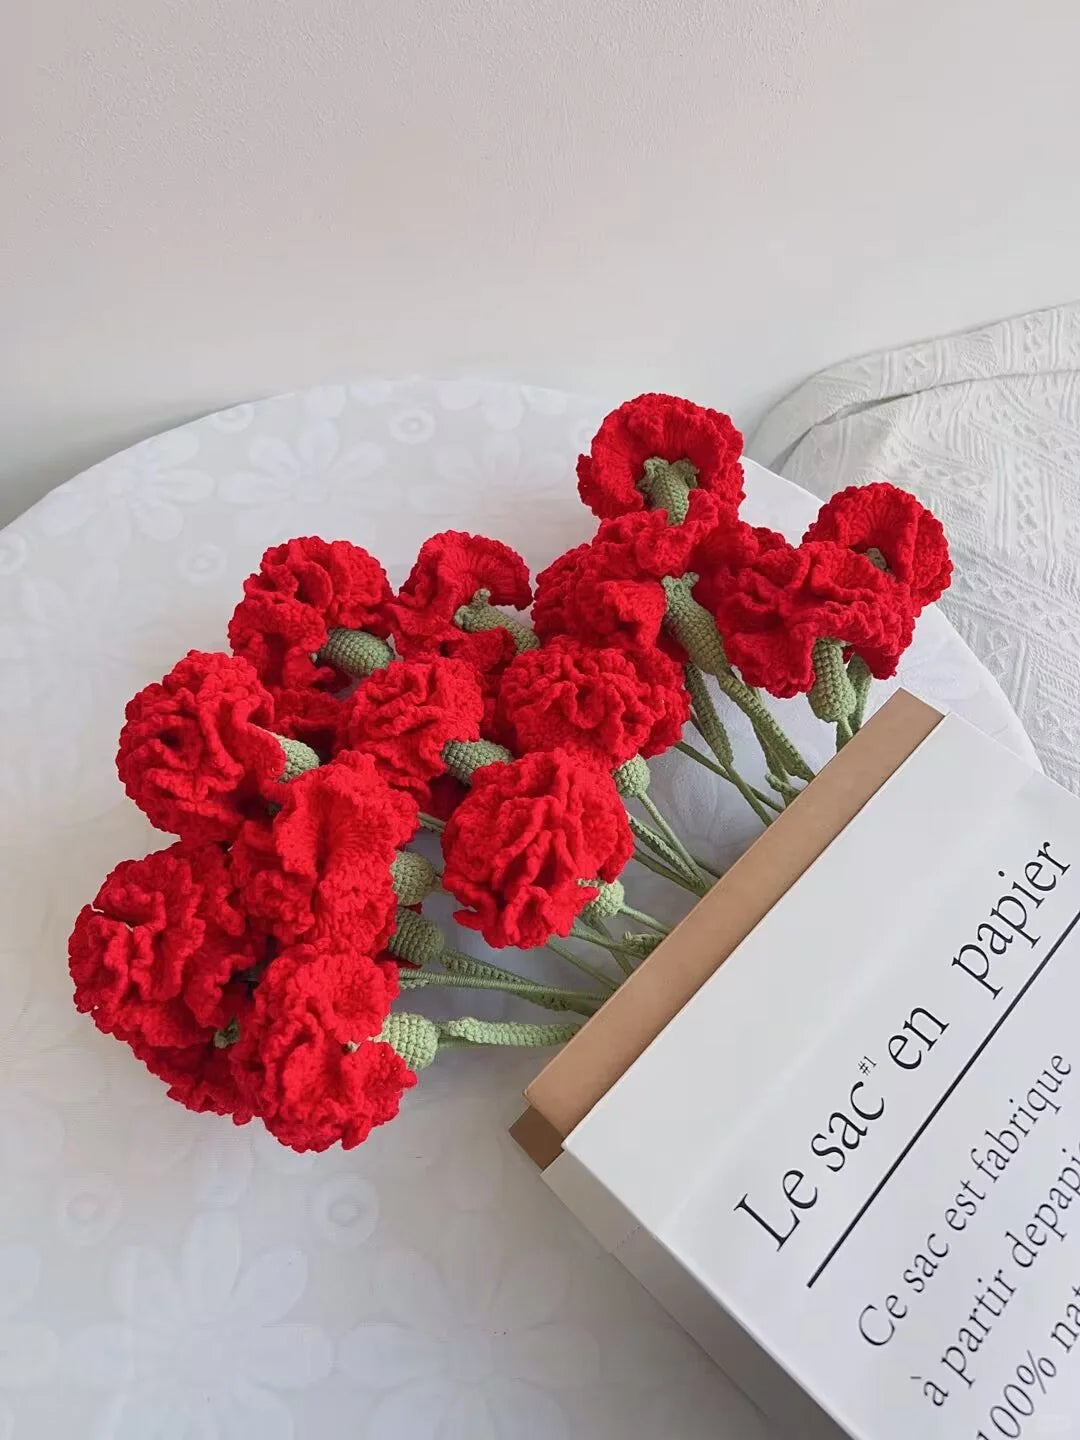 1 Carnation Crochet Carnation Home Decor Gifts For Mother's Day